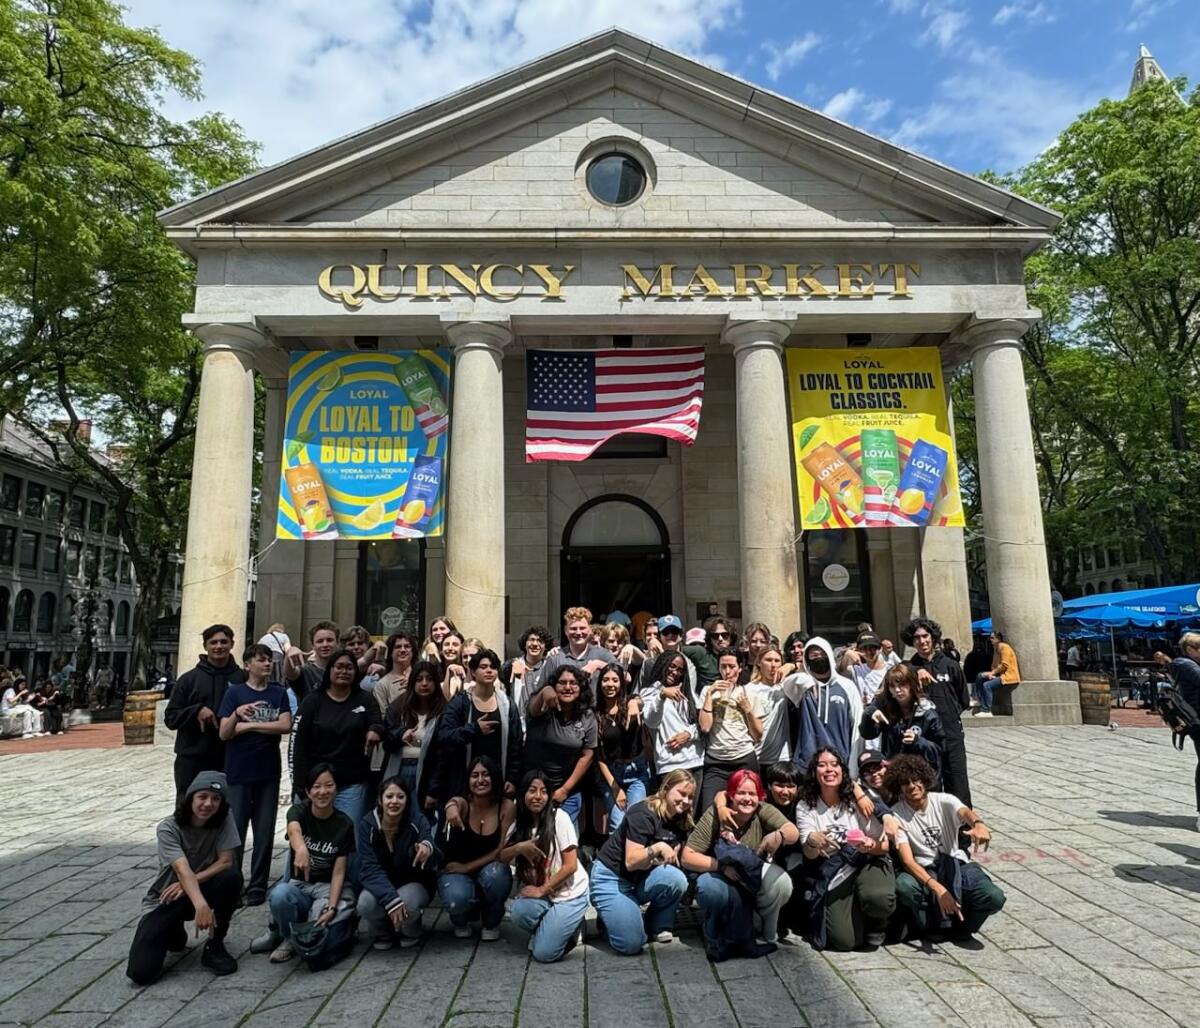 Members of the Newport Harbor wind ensemble and orchestra pose for a group picture at Quincy Market.